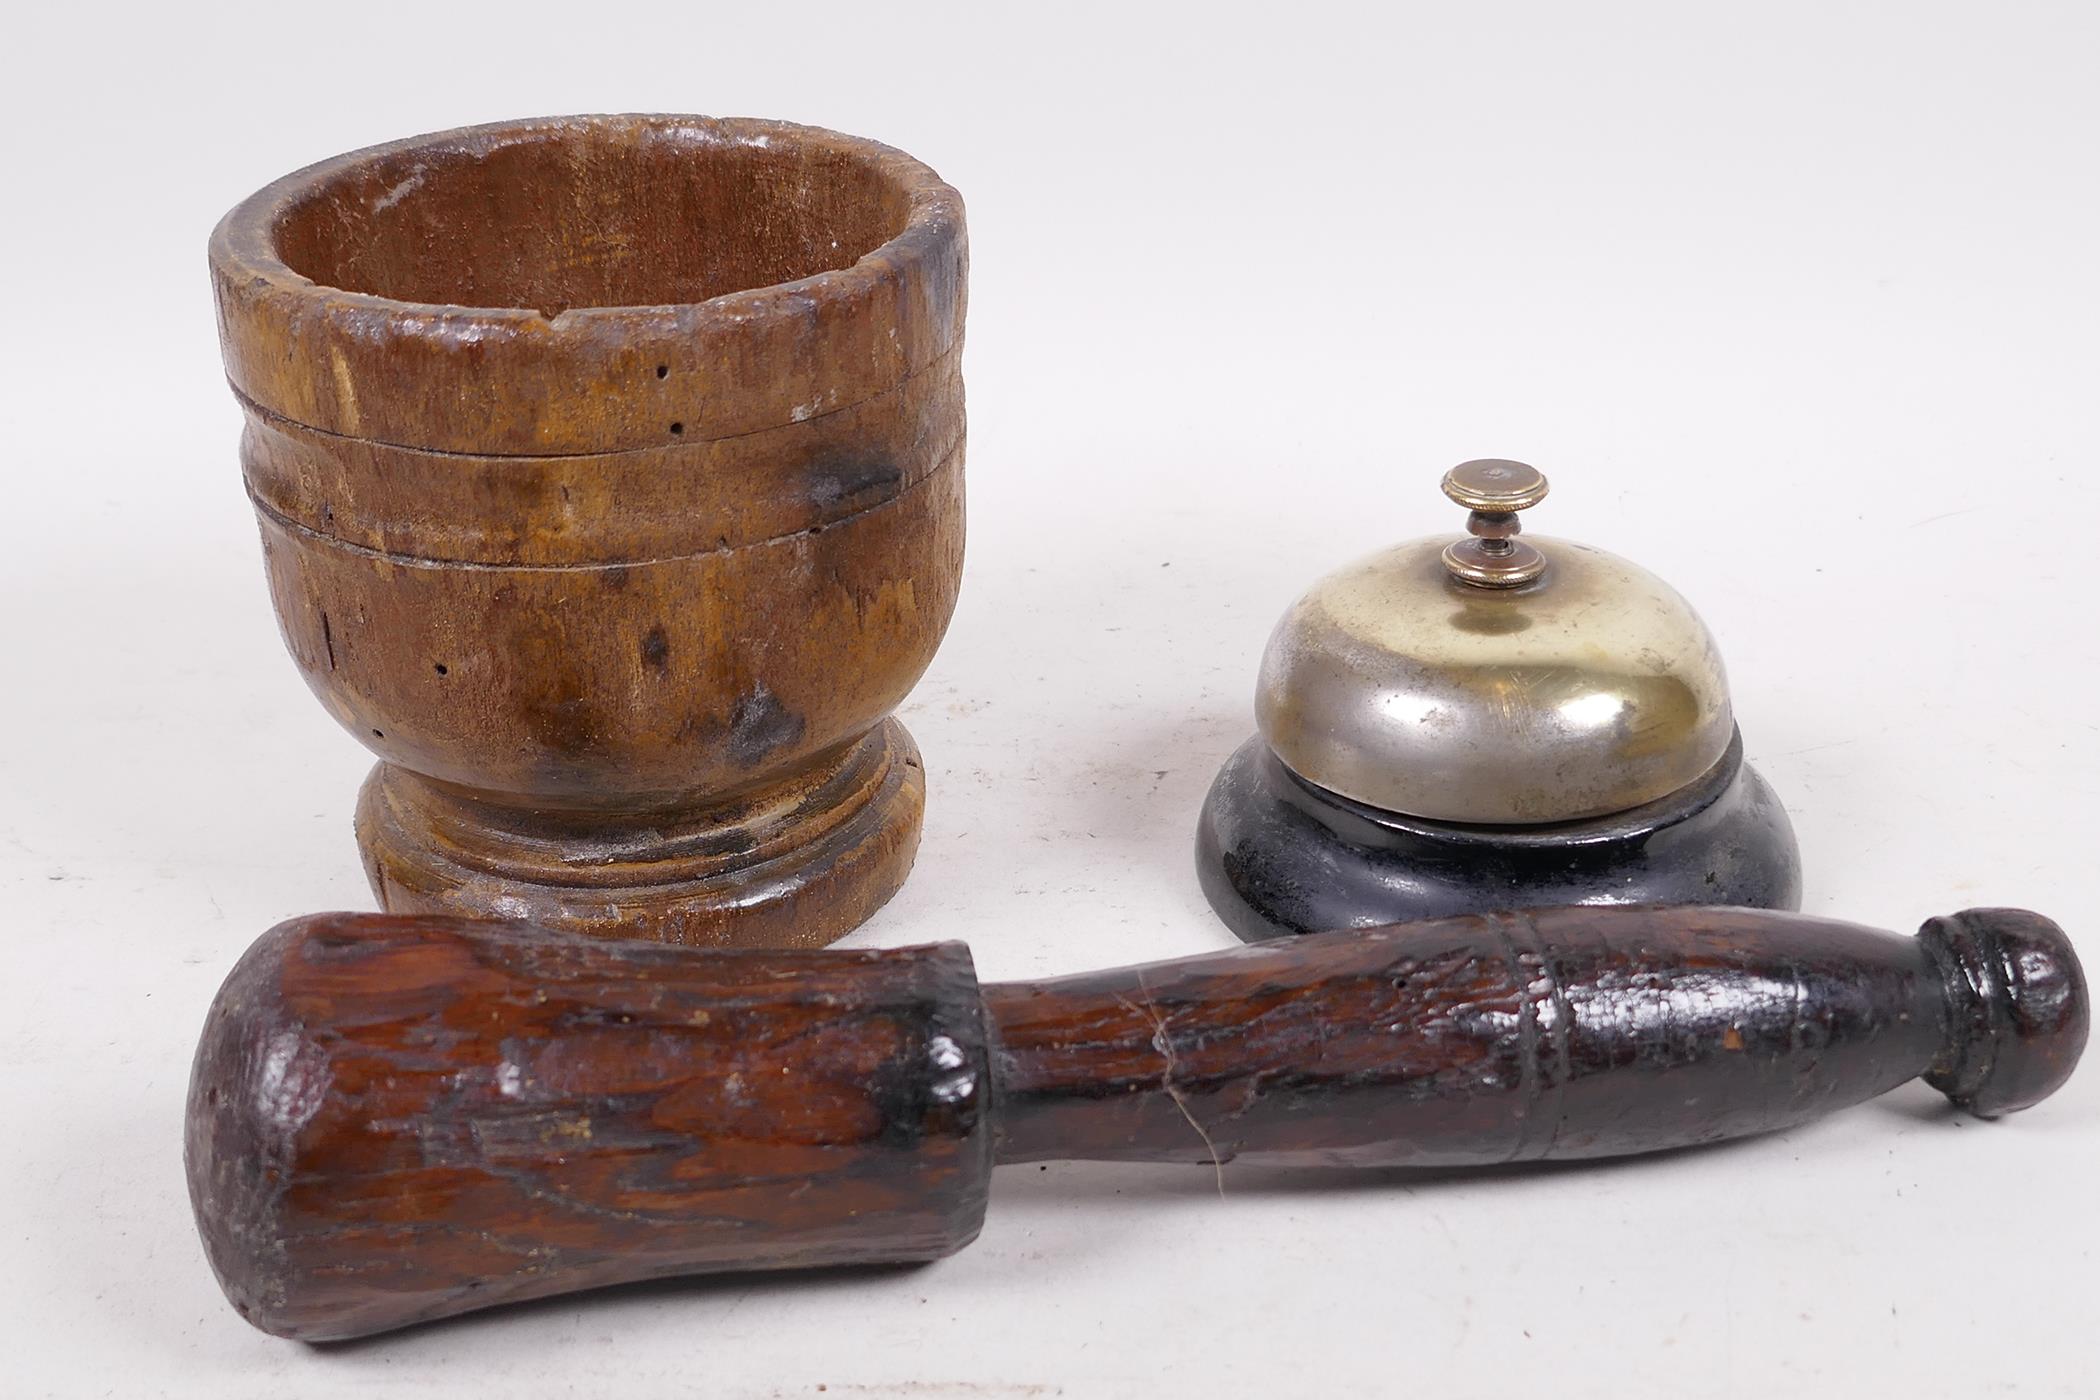 An antique French wooden mortar and pestle, mortar 4" high, and a reception desk bell